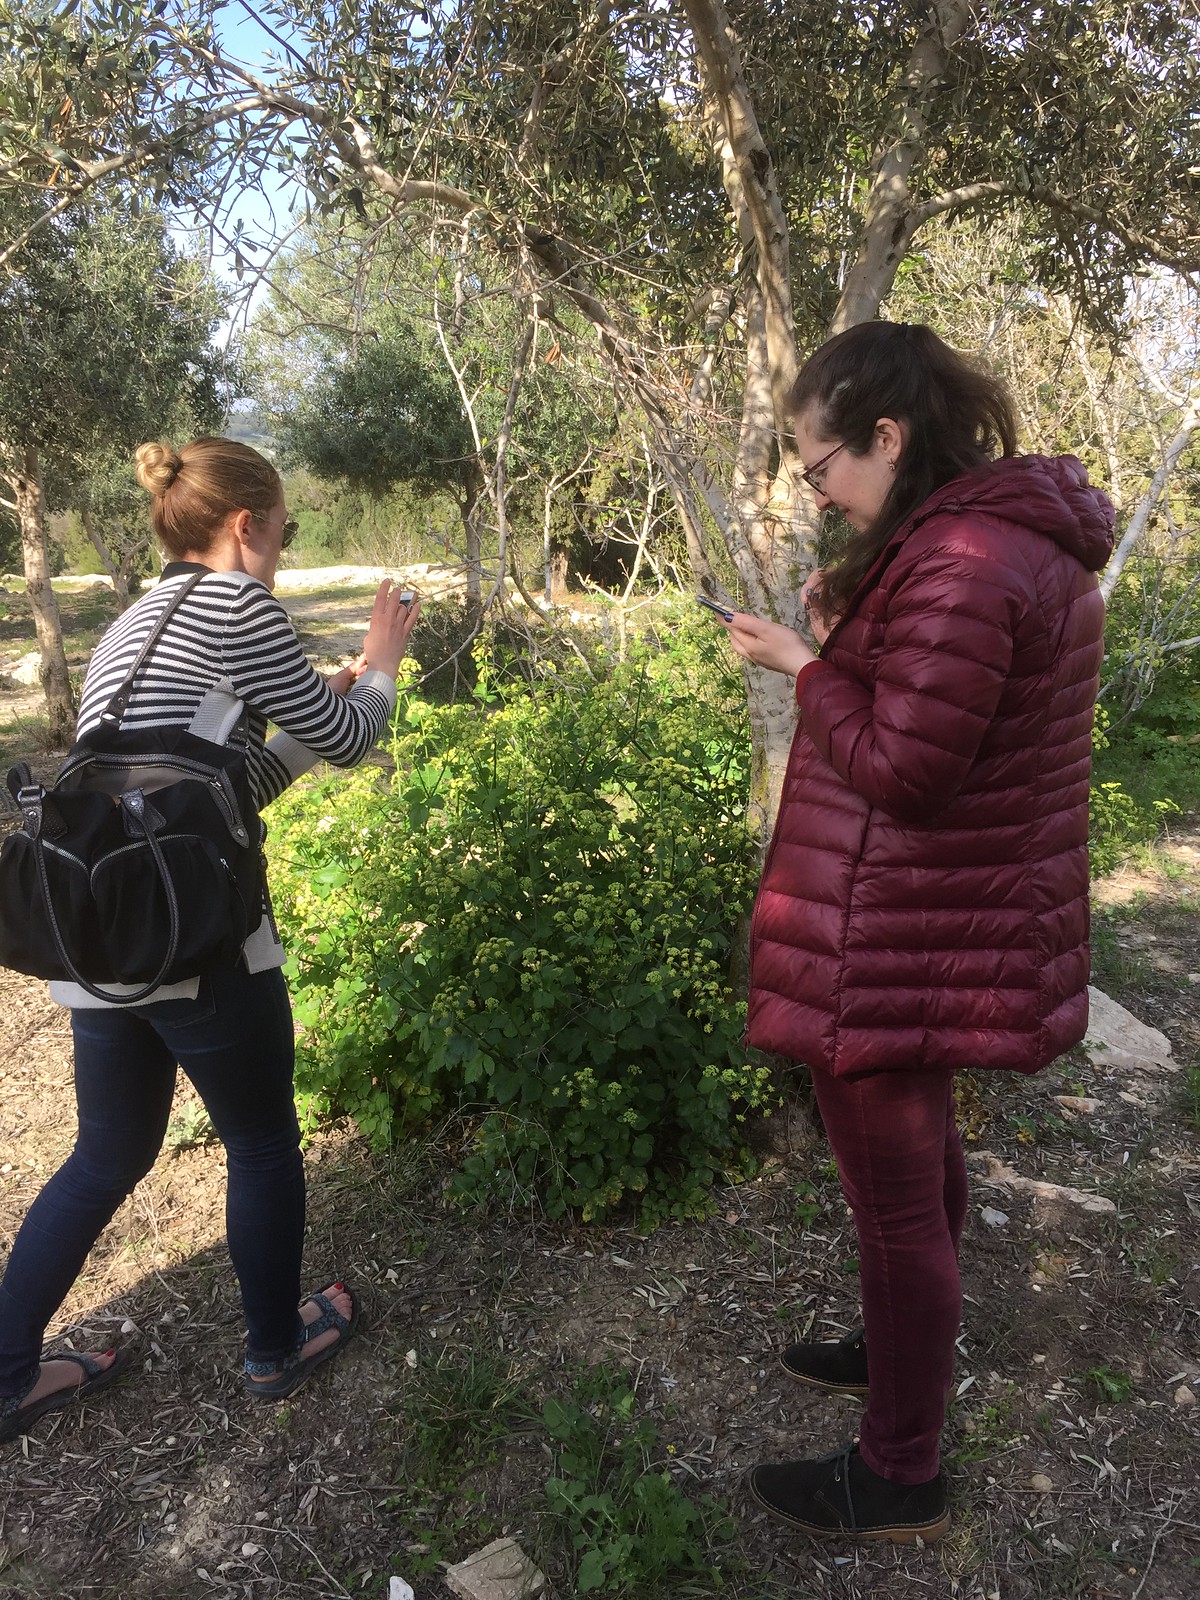 My Students Rock! Fougere Week-Long Course March 24-28, 2019 Perfume Trail in Park Adamit